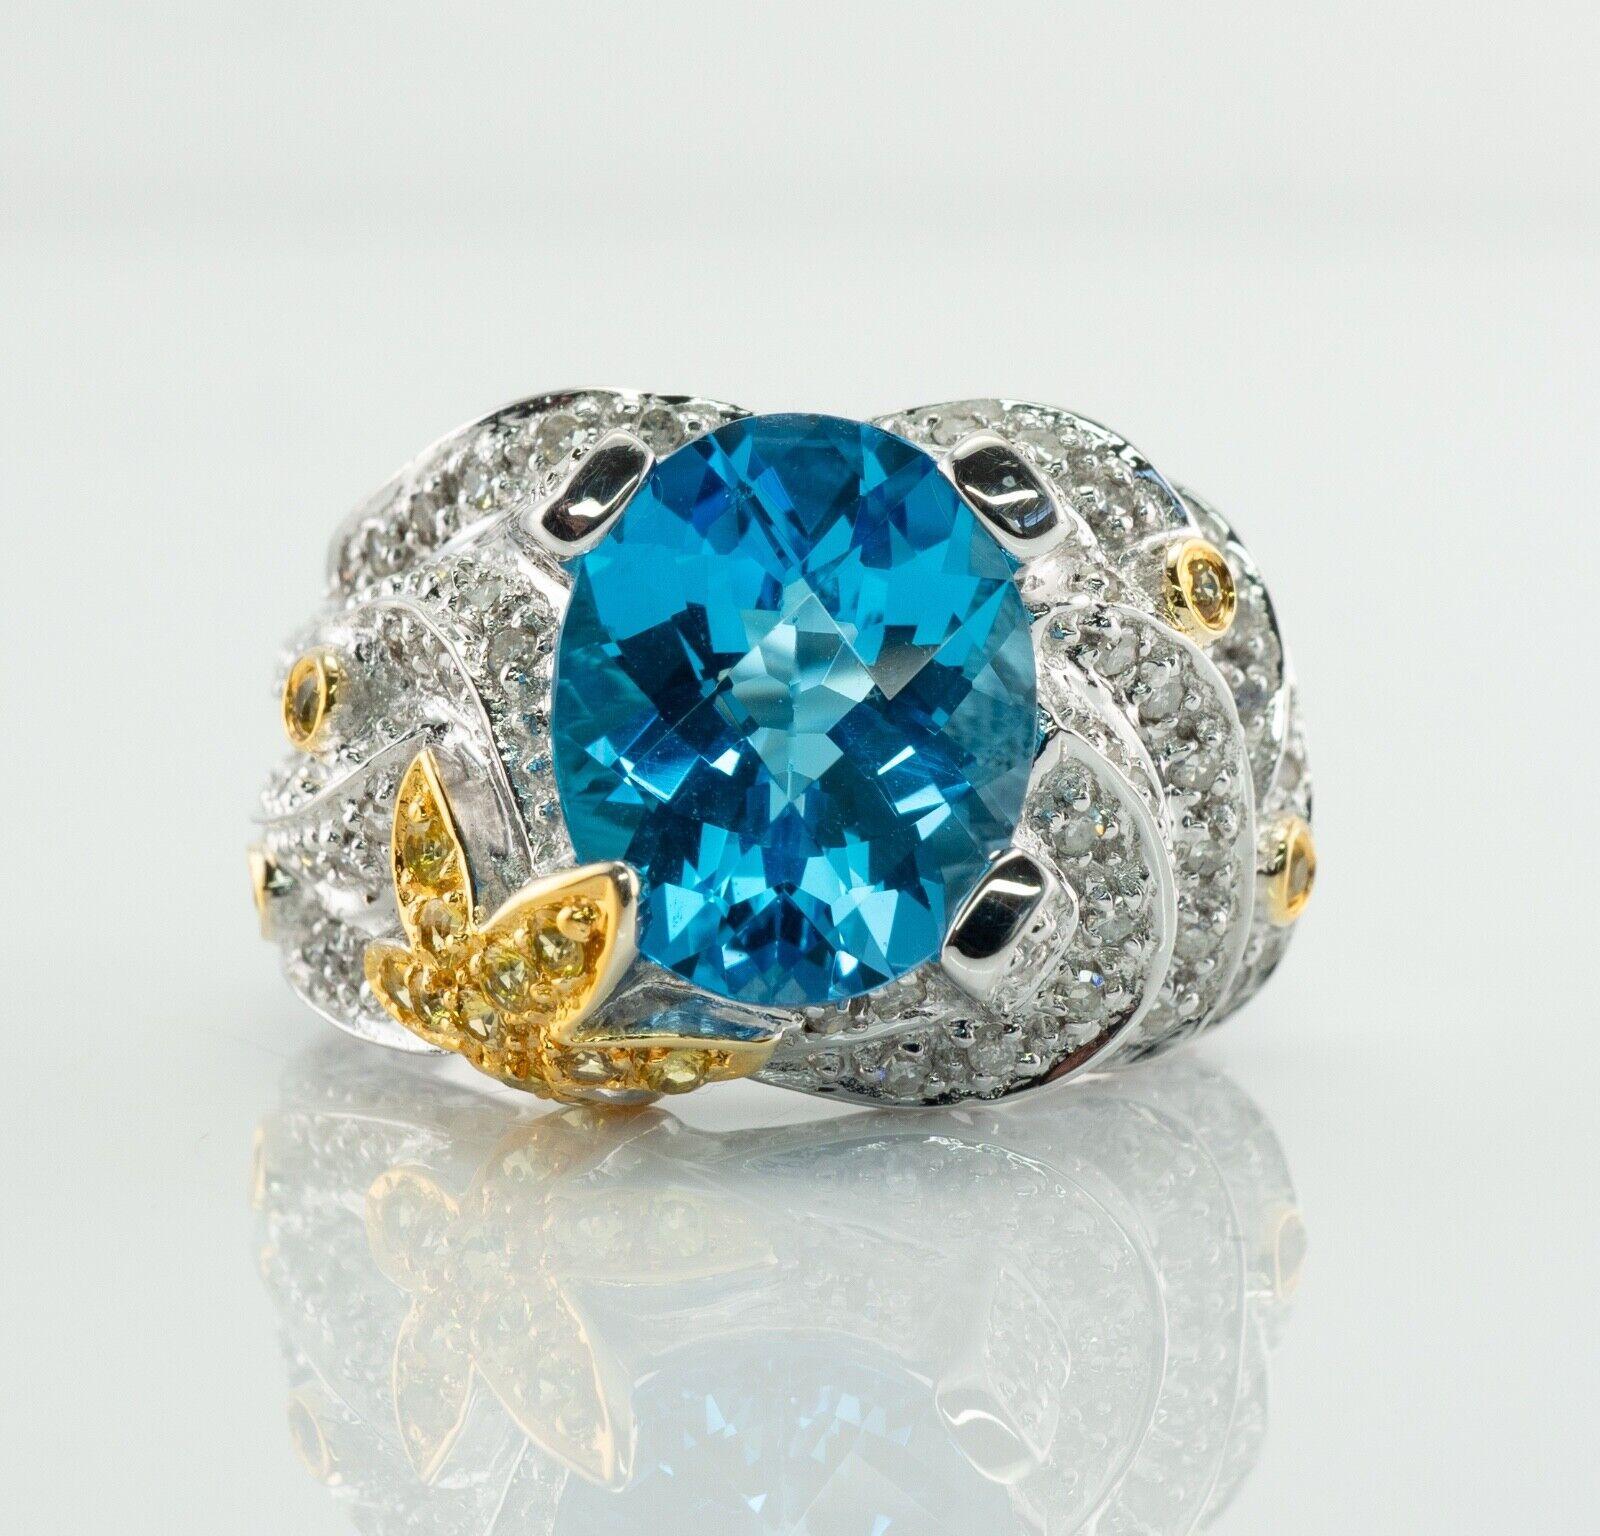 This showstopper estate ring is crafted in solid 14K White Gold. The center natural checkerboard blue Topaz measures 12x10mm (3.50 cts). This is a very clean and transparent gem of great intensity. The setting is studded with white diamonds and